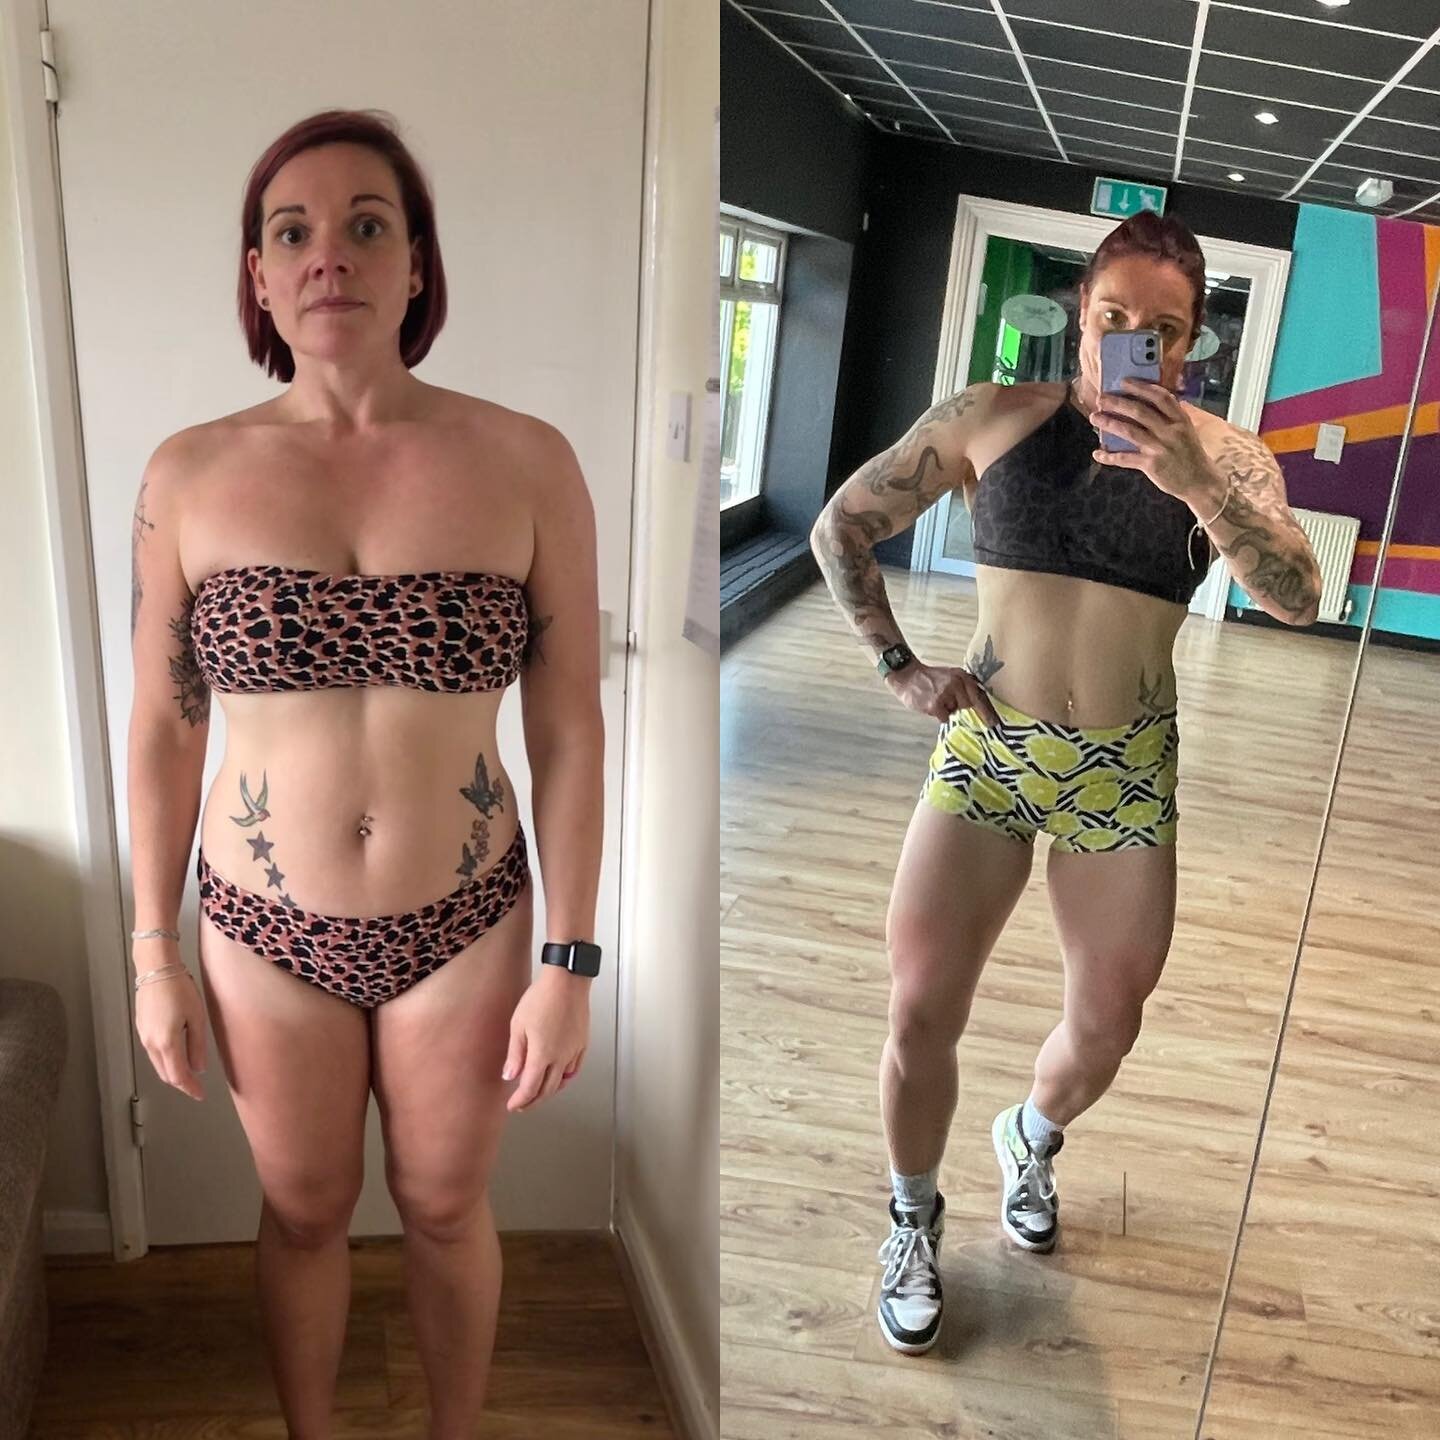 What&rsquo;s your goal weight? 🤔
-
I can honestly tell you if you&rsquo;d have told that version of me on the left that I could have the healthy strong &lsquo;toned&rsquo; body I have today but I&rsquo;d weigh MORE I&rsquo;m not sure I&rsquo;d have 